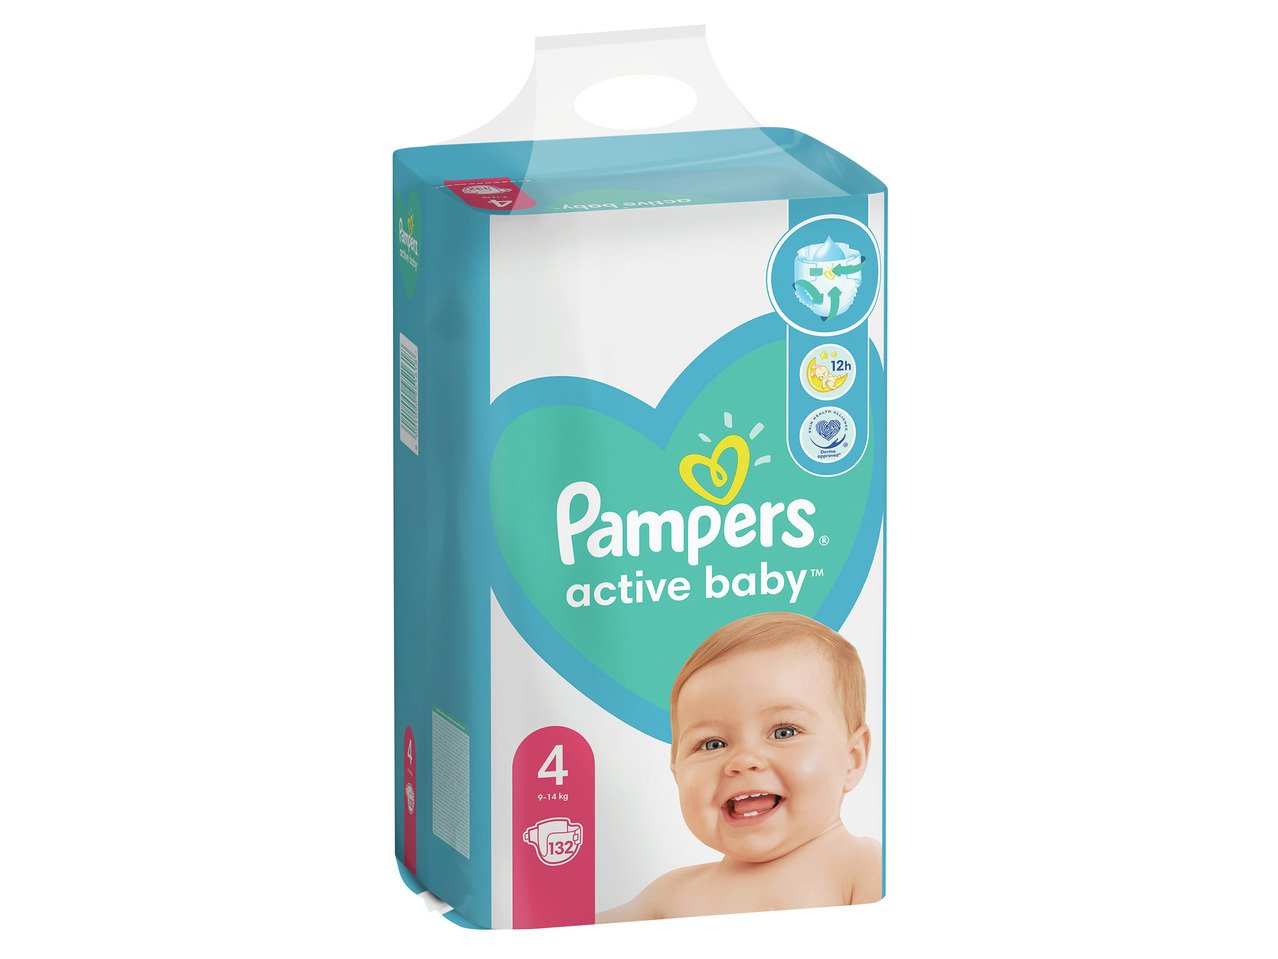 Pampers Active baby Бебешки пелени